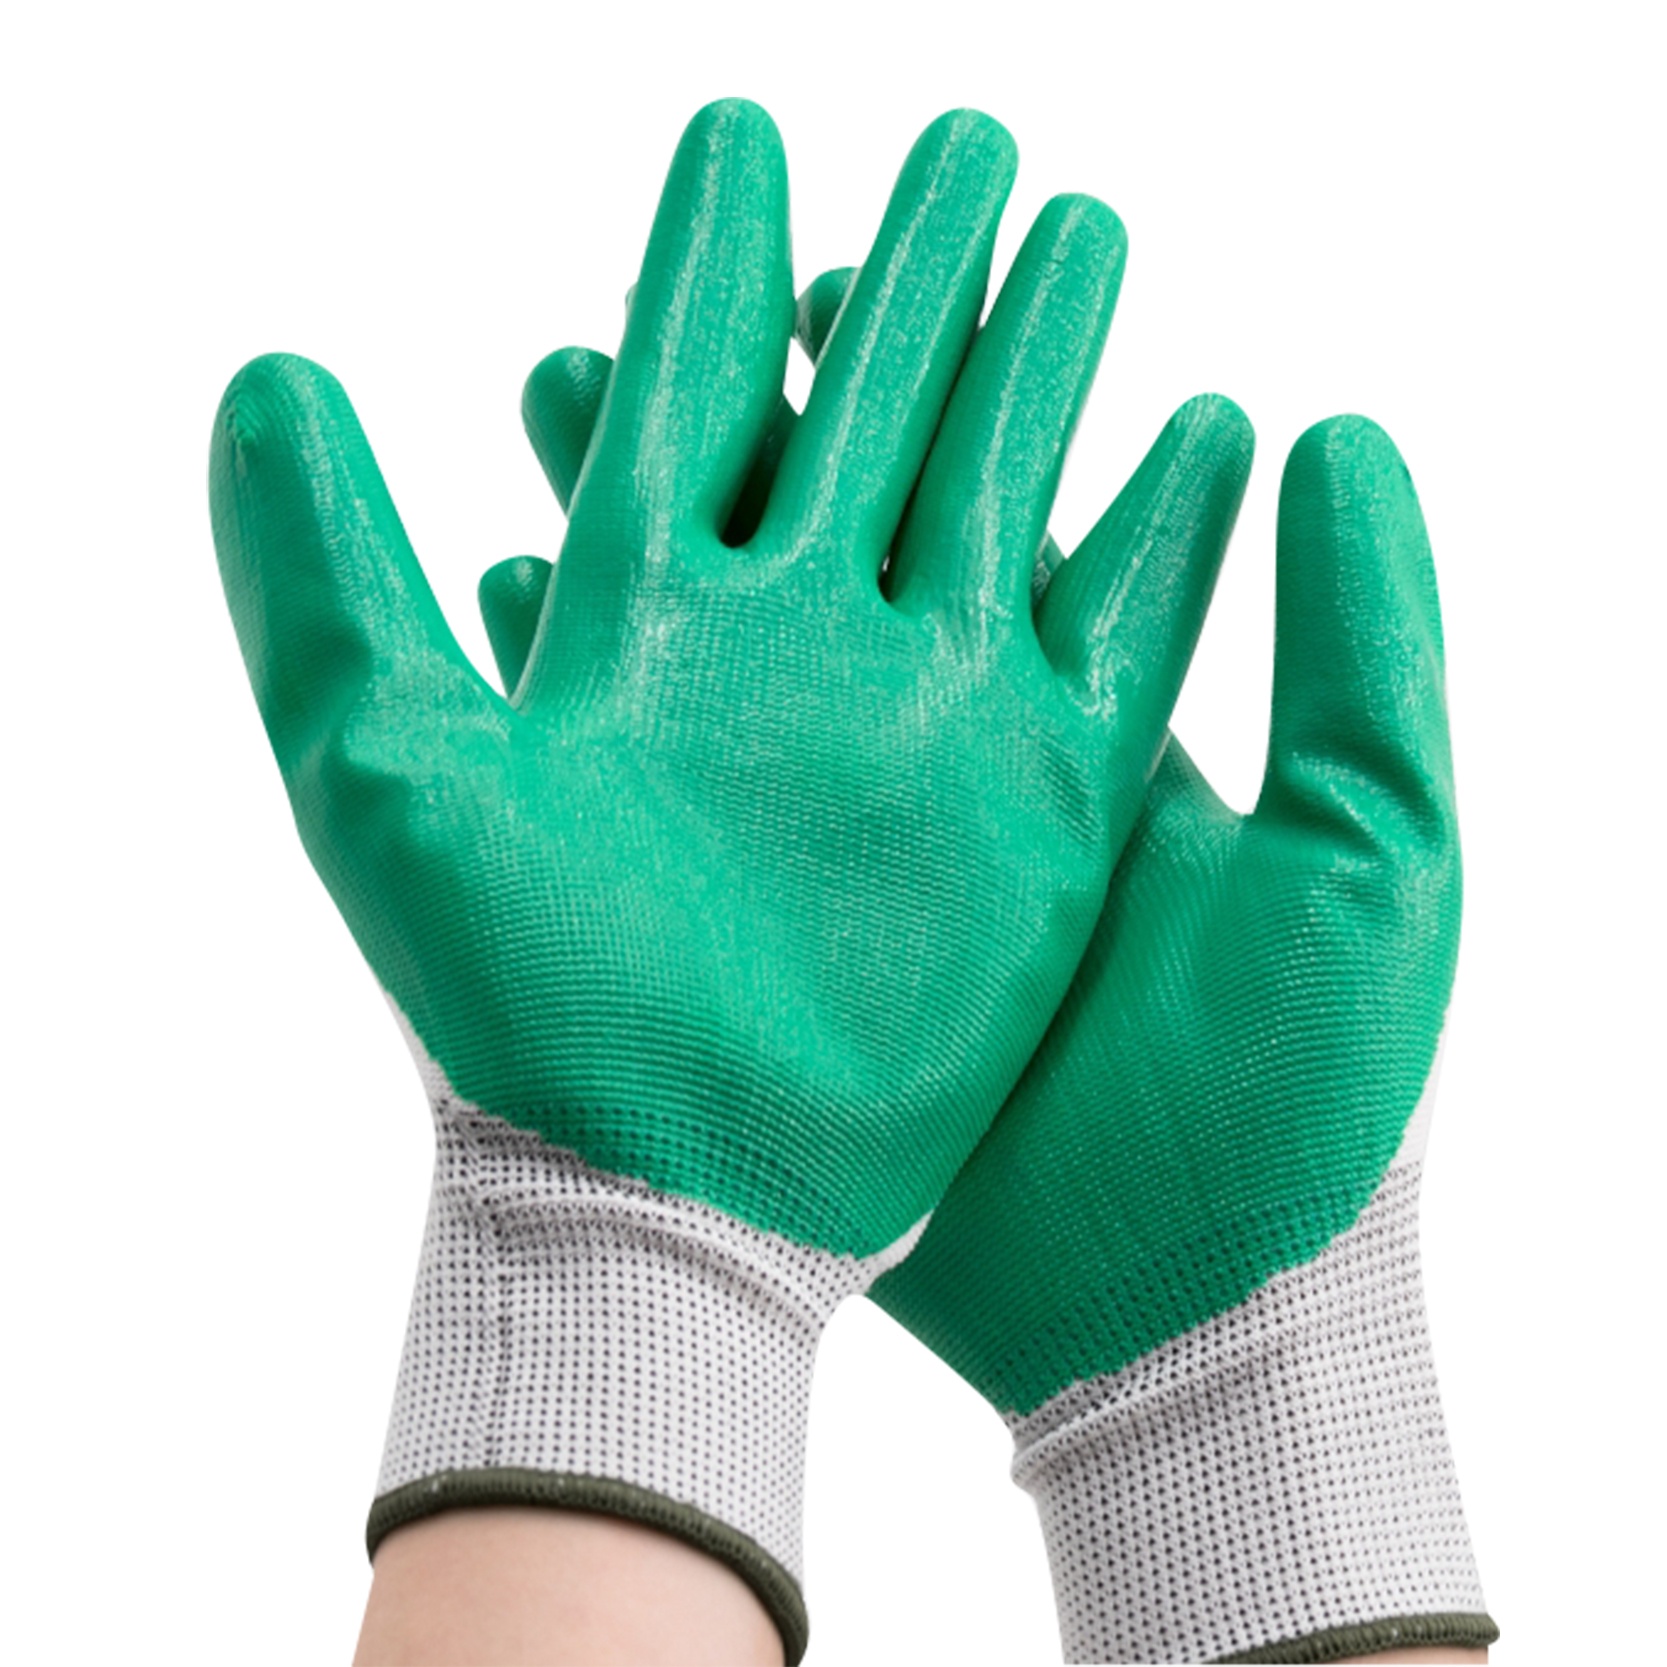 Customizable Blue White Polyester Palm Nitrile Coated Work Gloves (1)